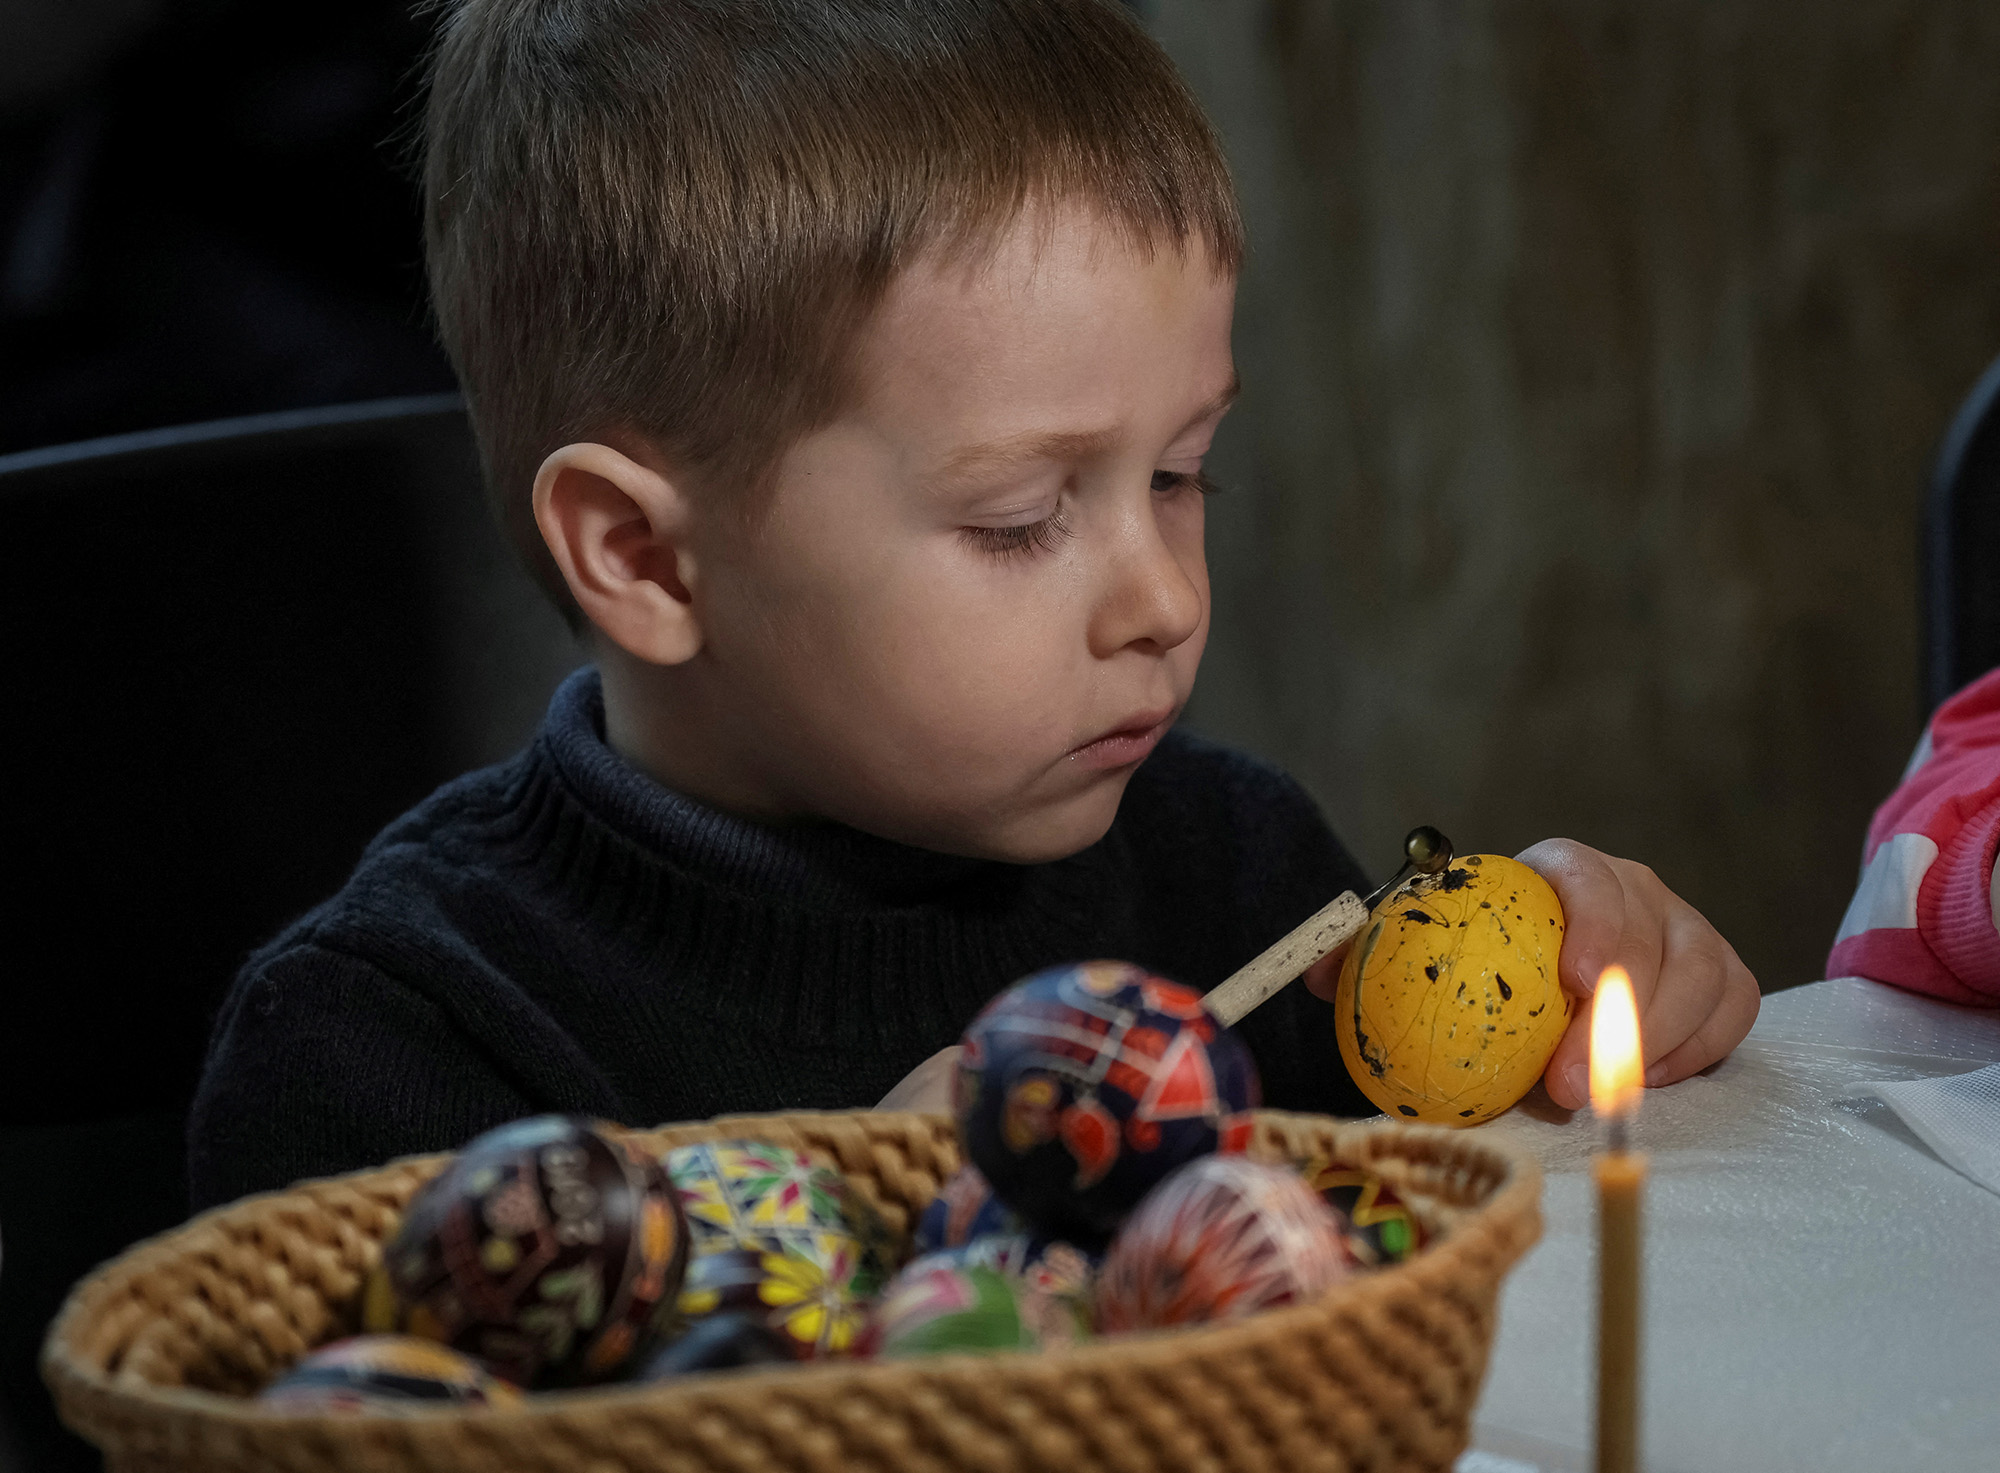 A boy paints an Easter egg in the traditional style during a lesson for children for the upcoming Easter holiday in Kyiv, Ukraine on April 22.